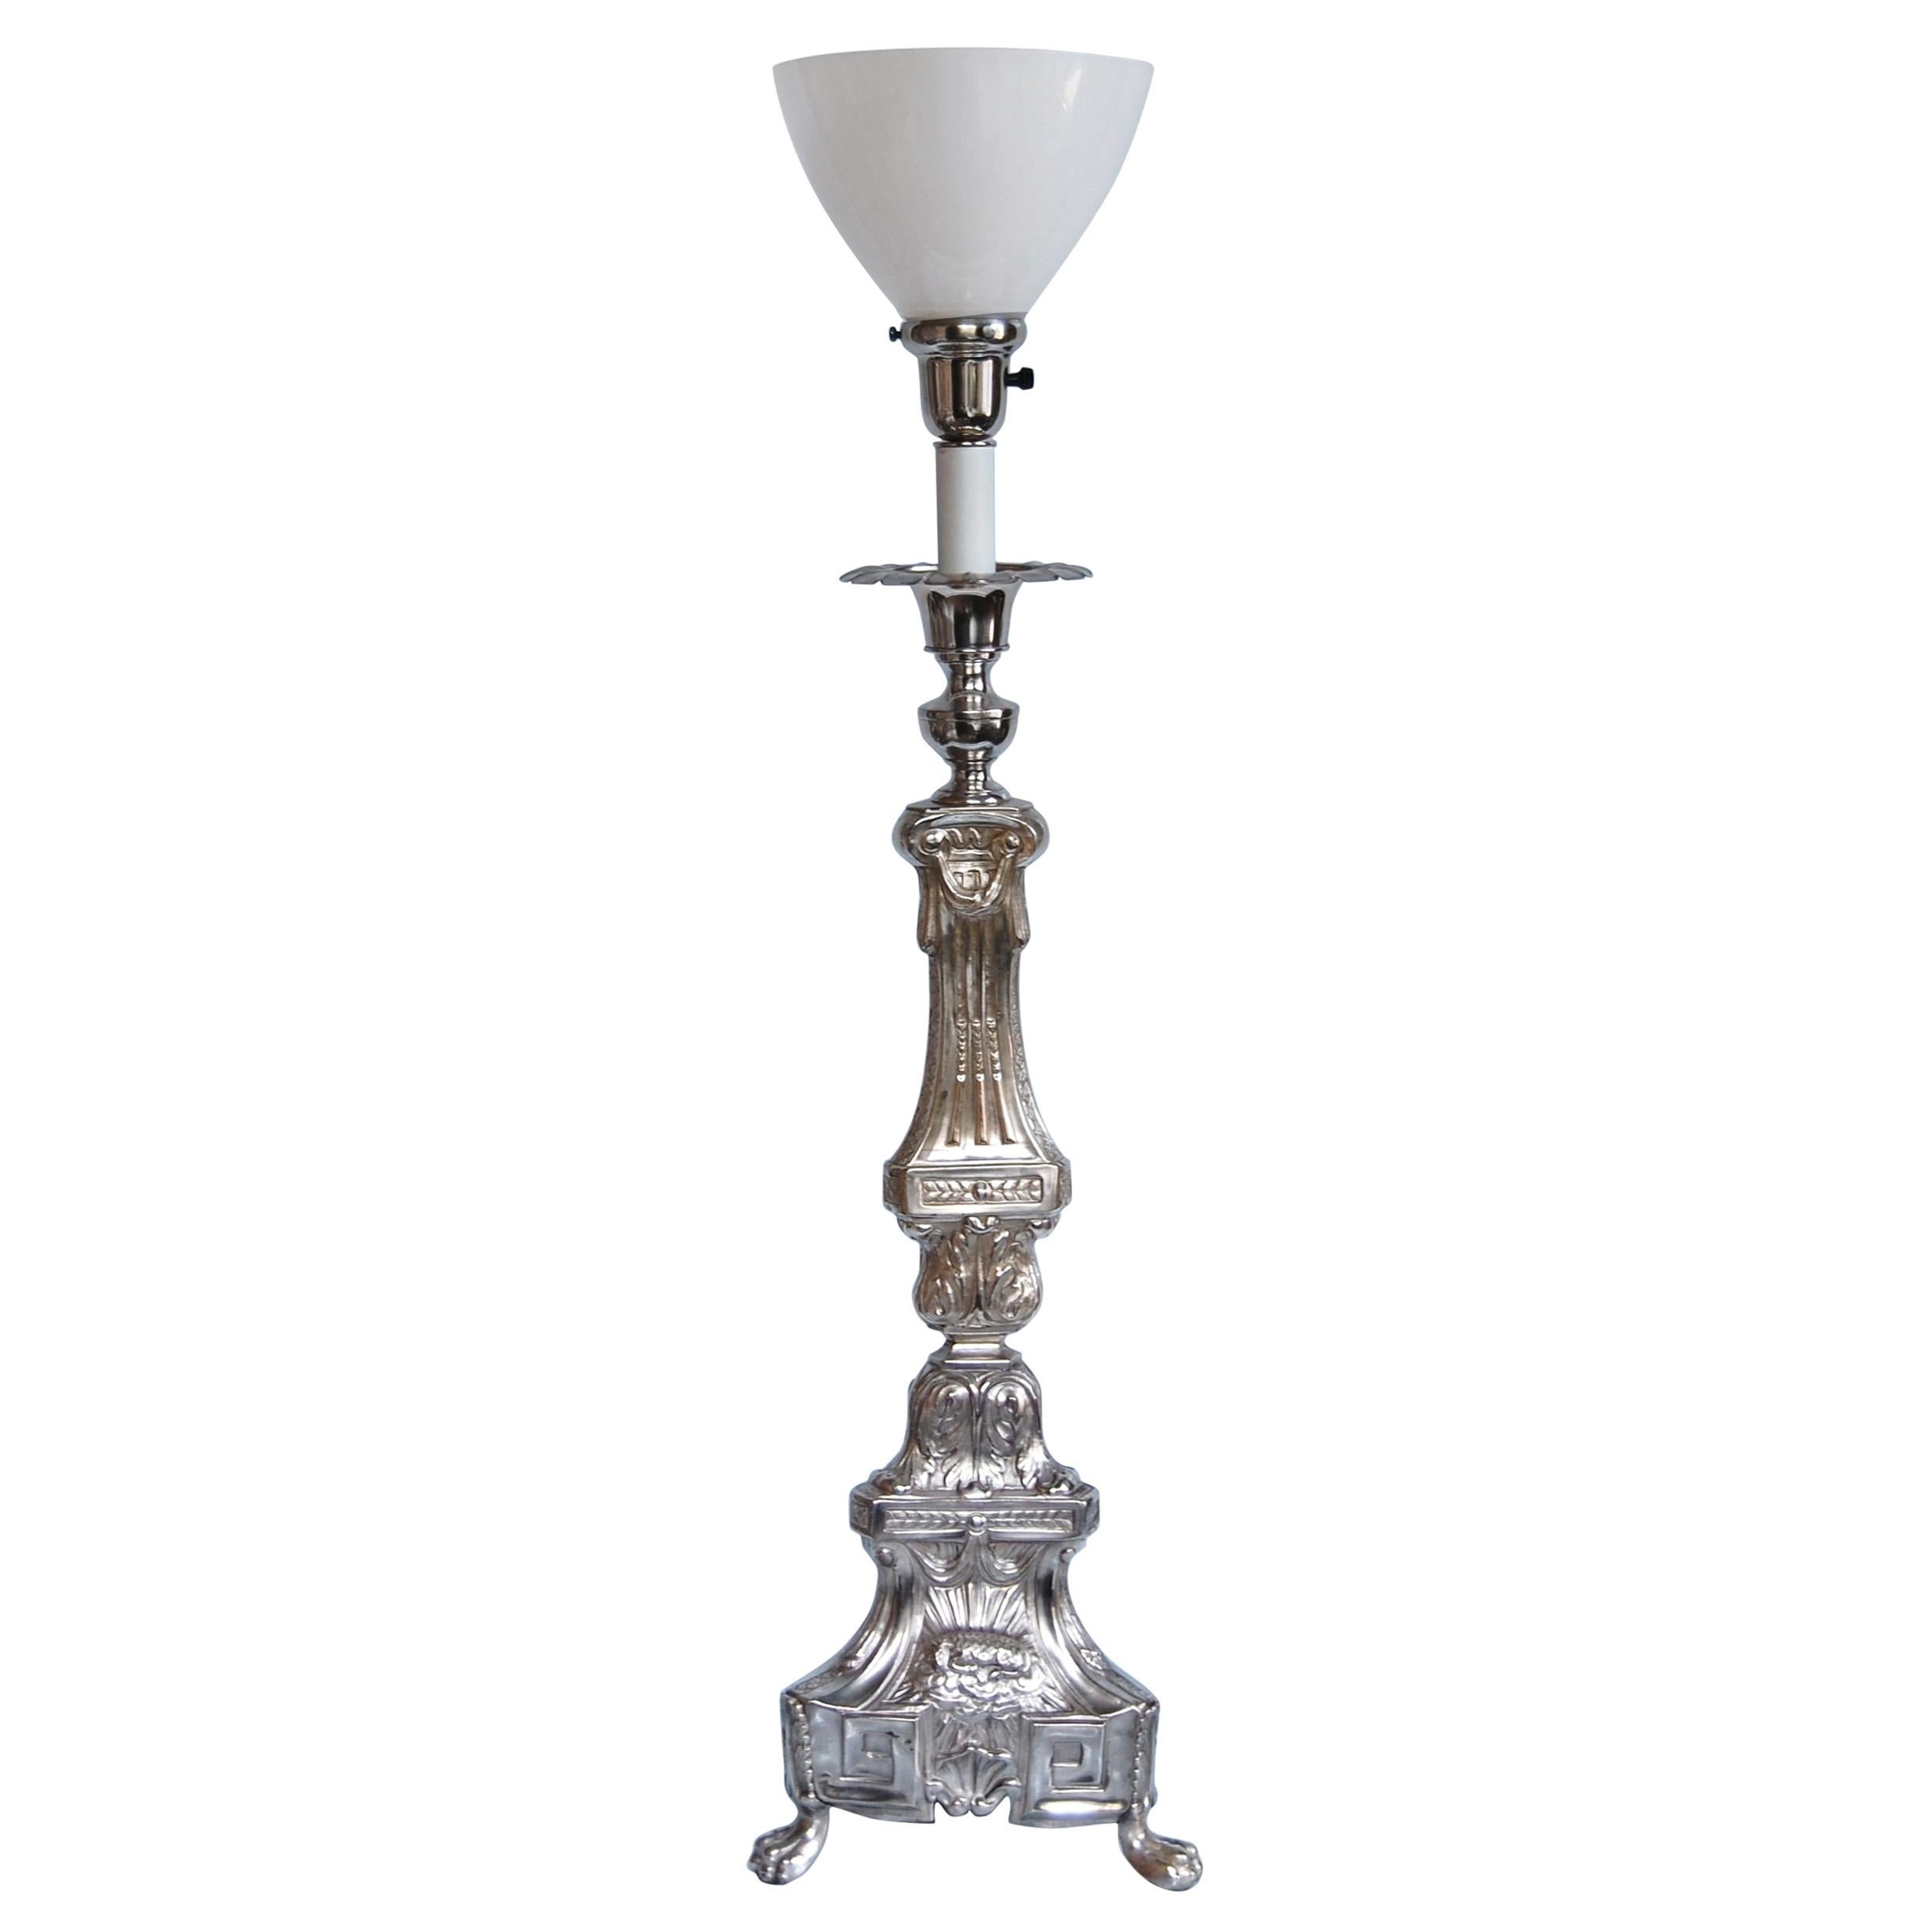 19th Century Silver Plated Altar Candlestick Wired as Lamp